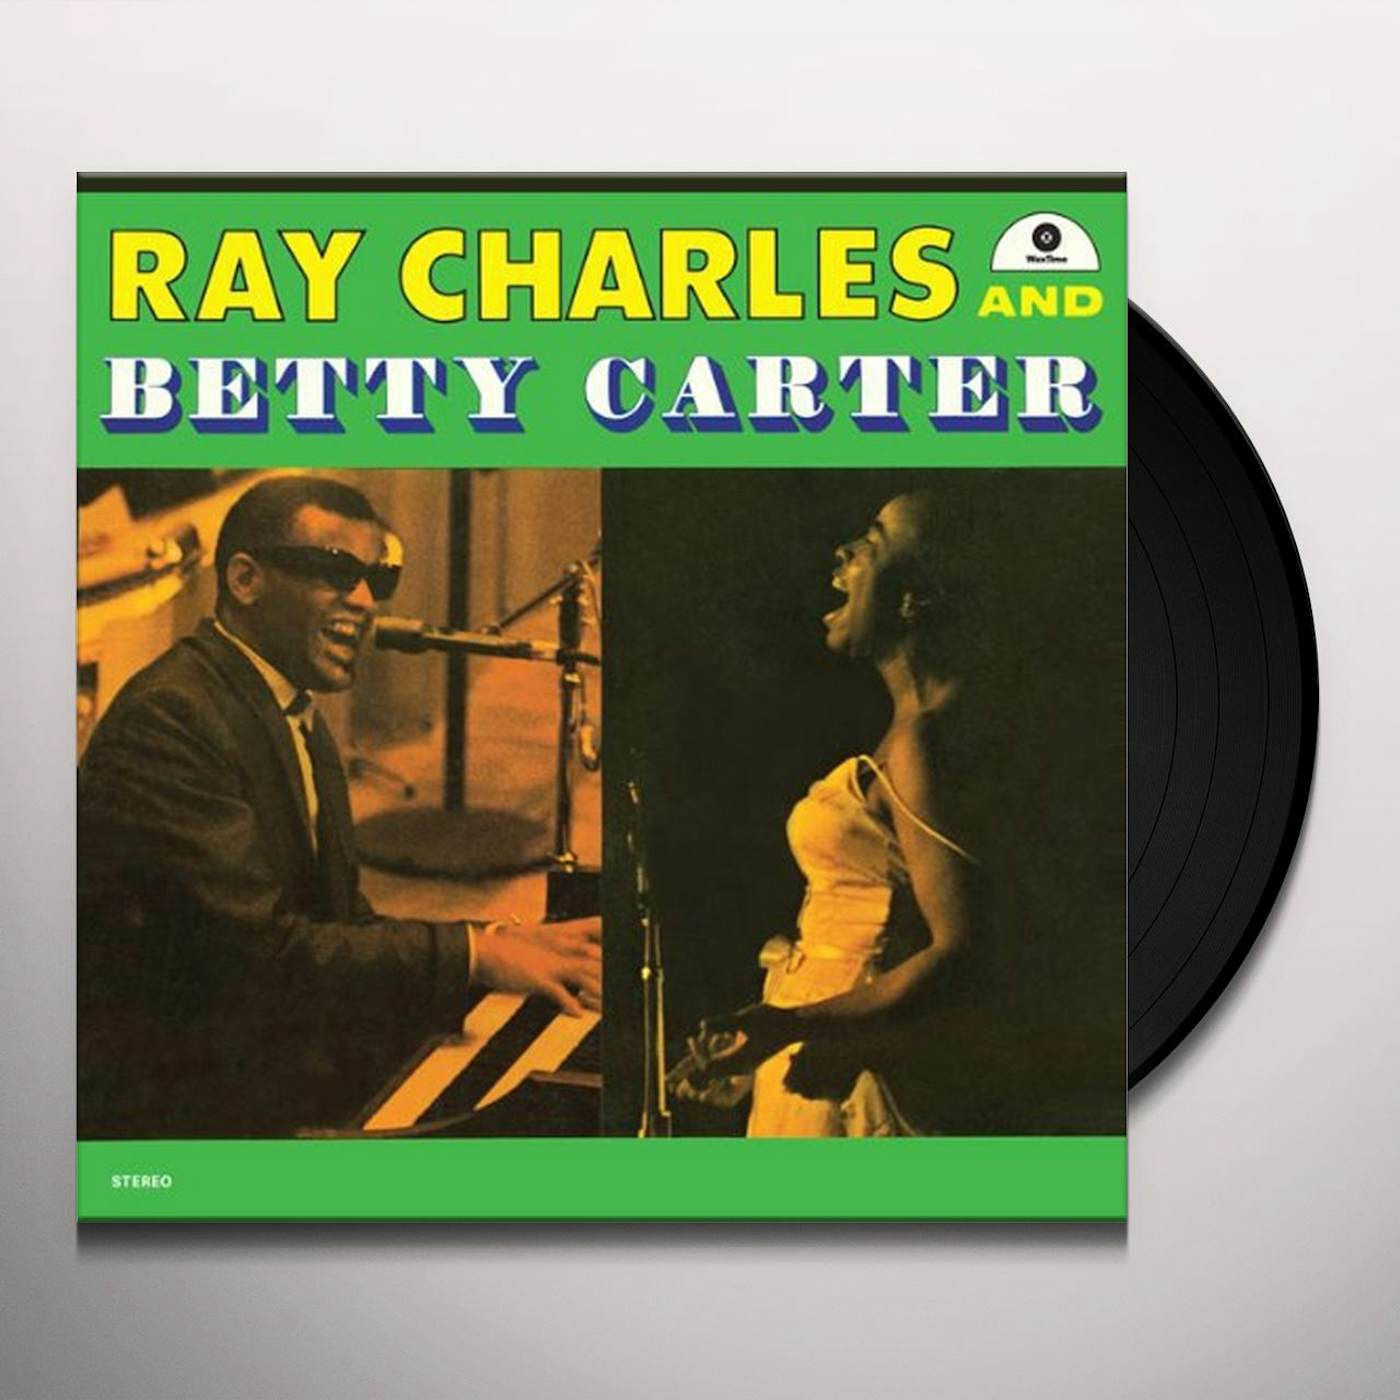 RAY CHARLES & BETTY CARTER Vinyl Record - Spain Release